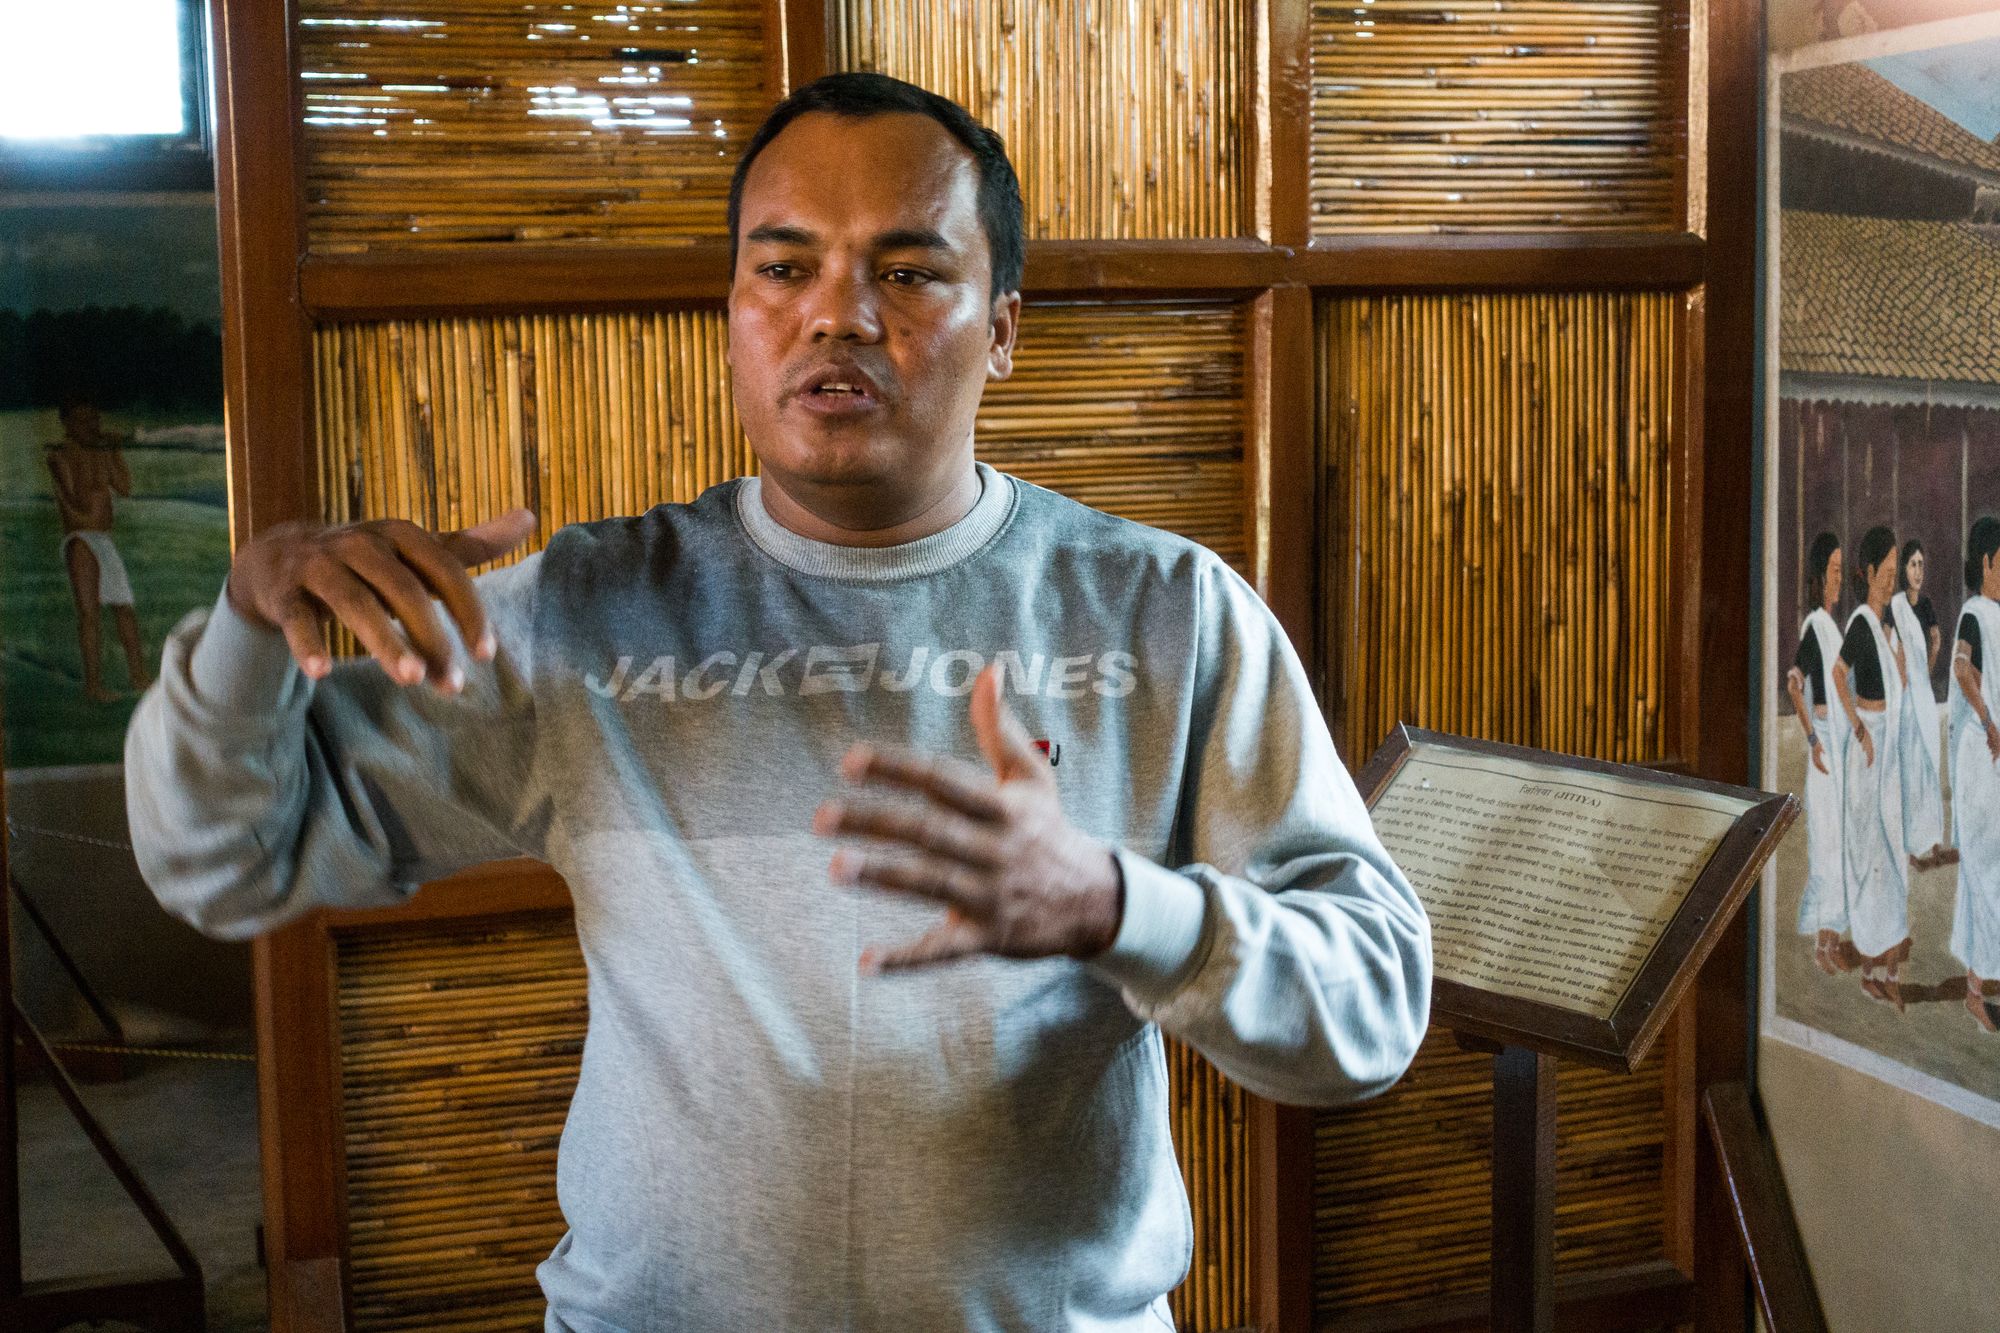 Birendra Mahato, chairperson of the Tharu Cultural Museum and Research Center, stands giving a speech whilst gesturing his hands.